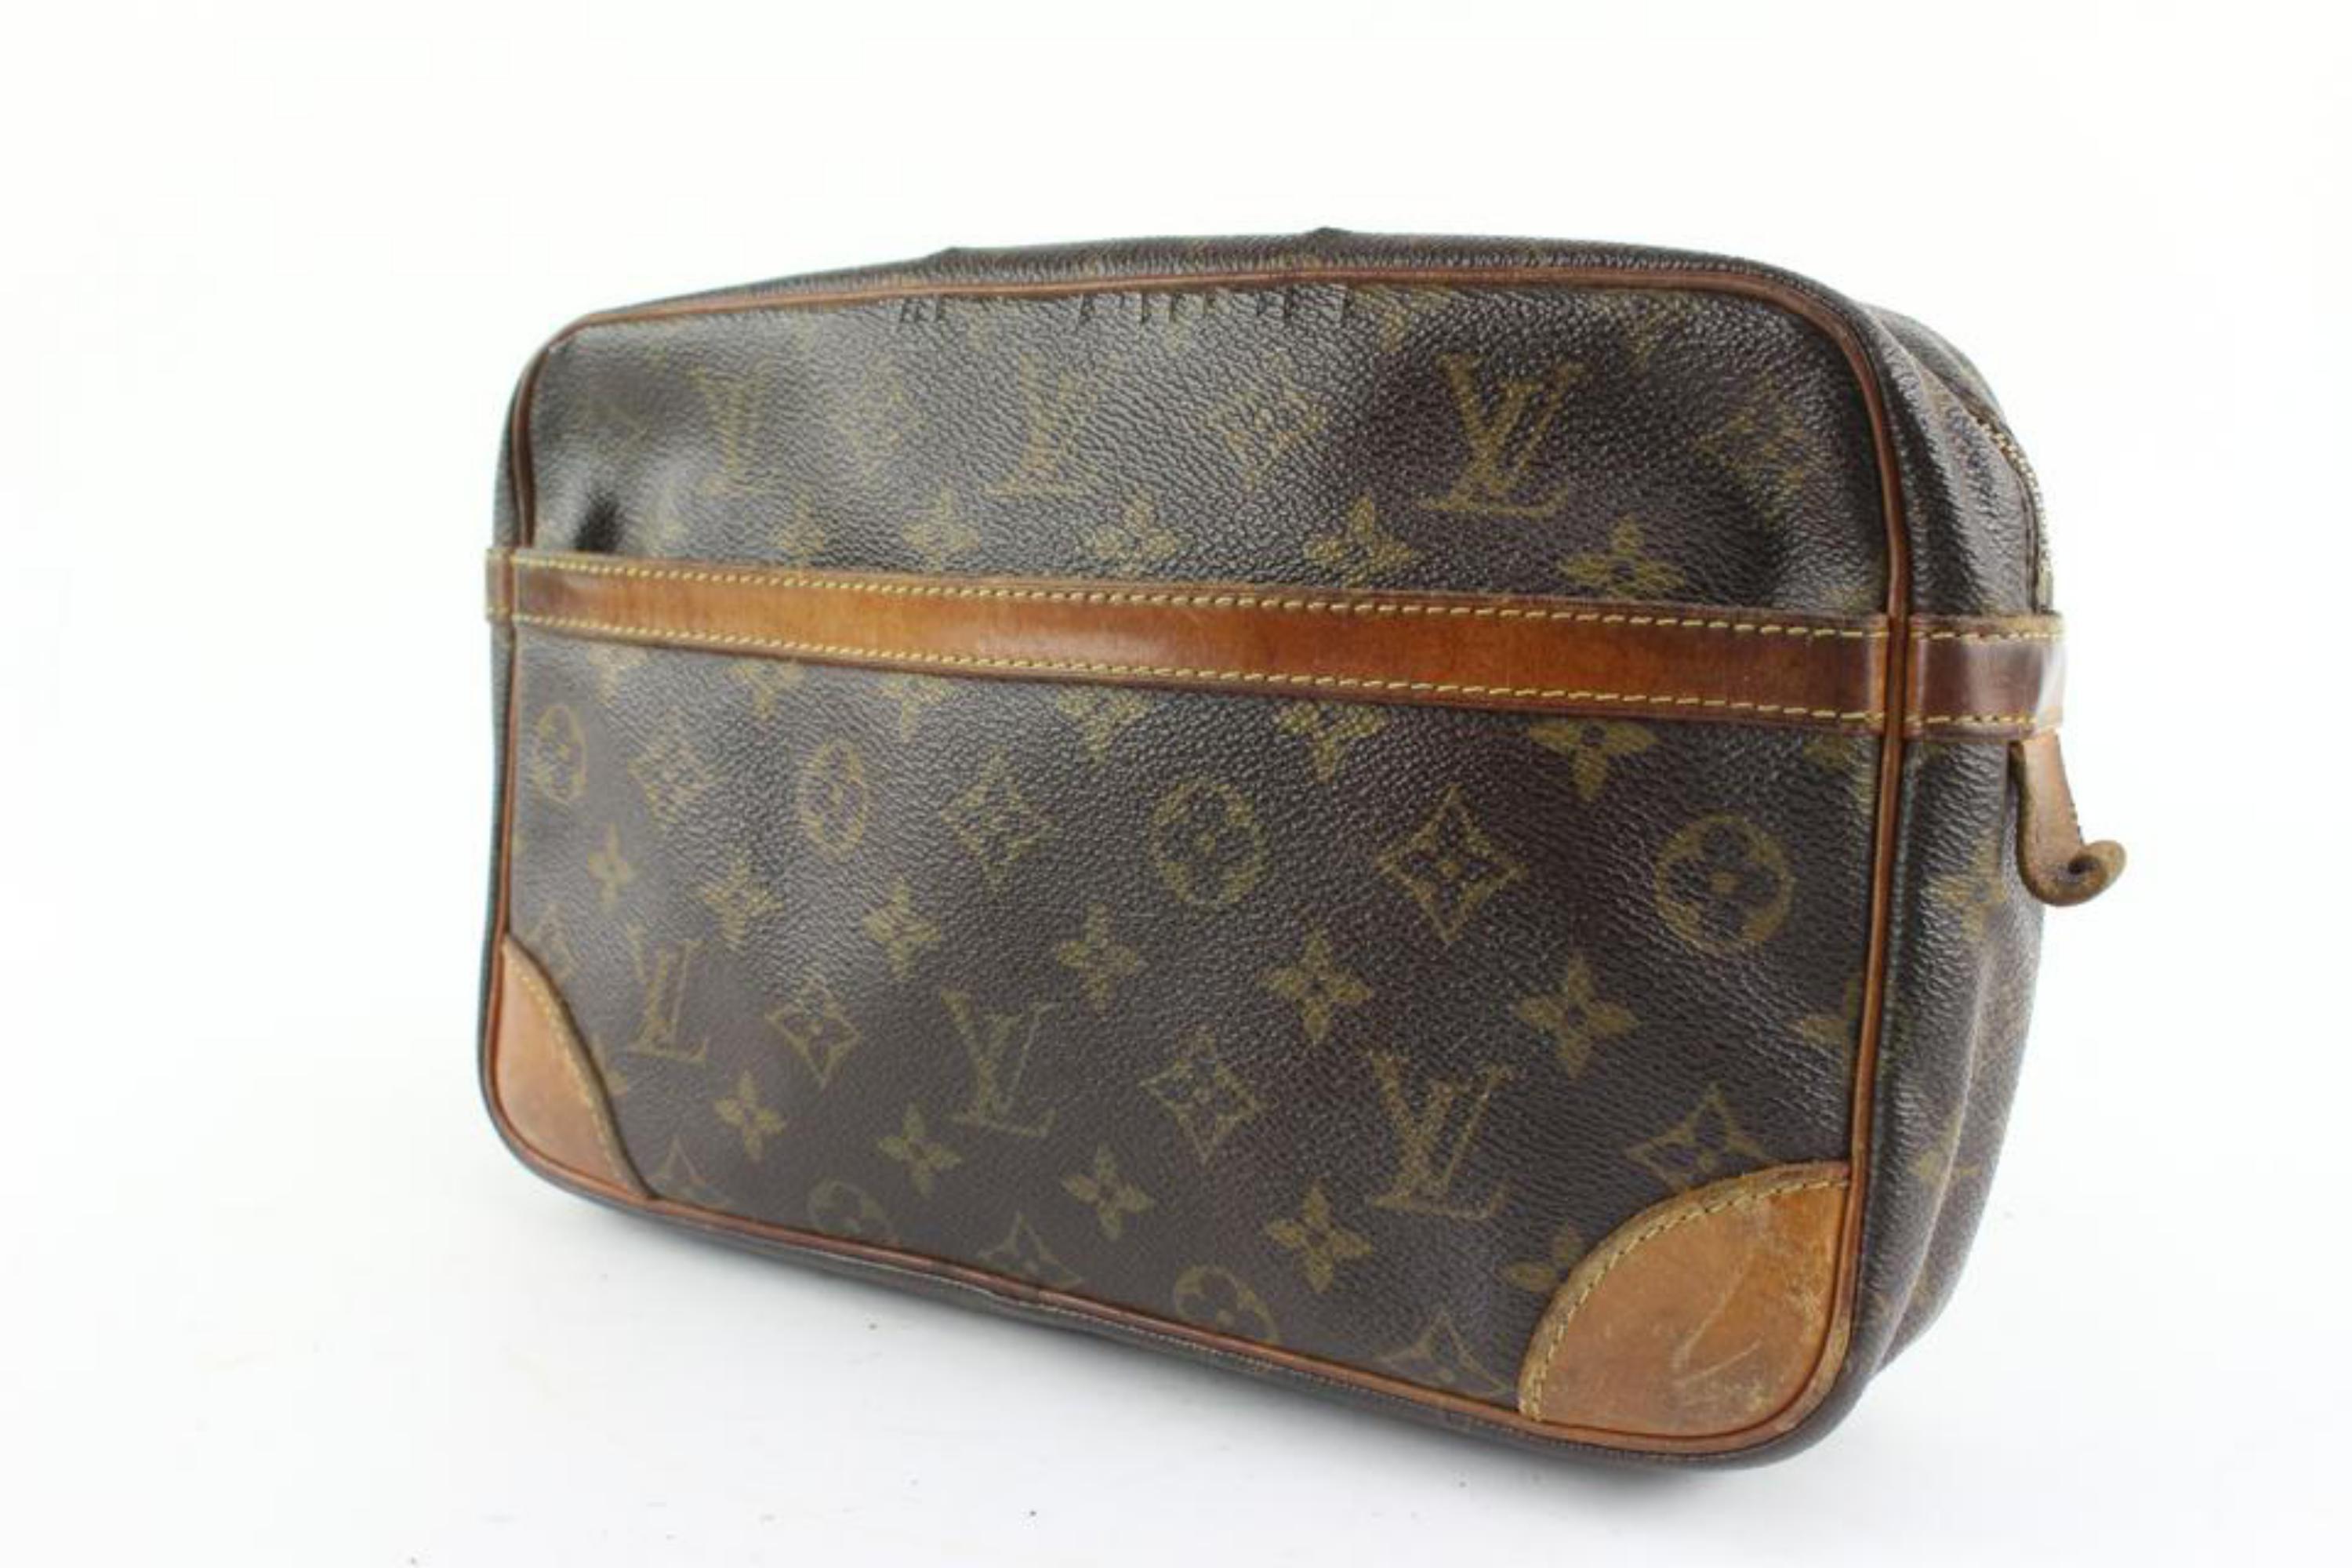 Louis Vuitton Monogram Compiegne 28 Make Up Case 1224lv26
Date Code/Serial Number: 851 SL
Made In: France
Measurements: Length:  11